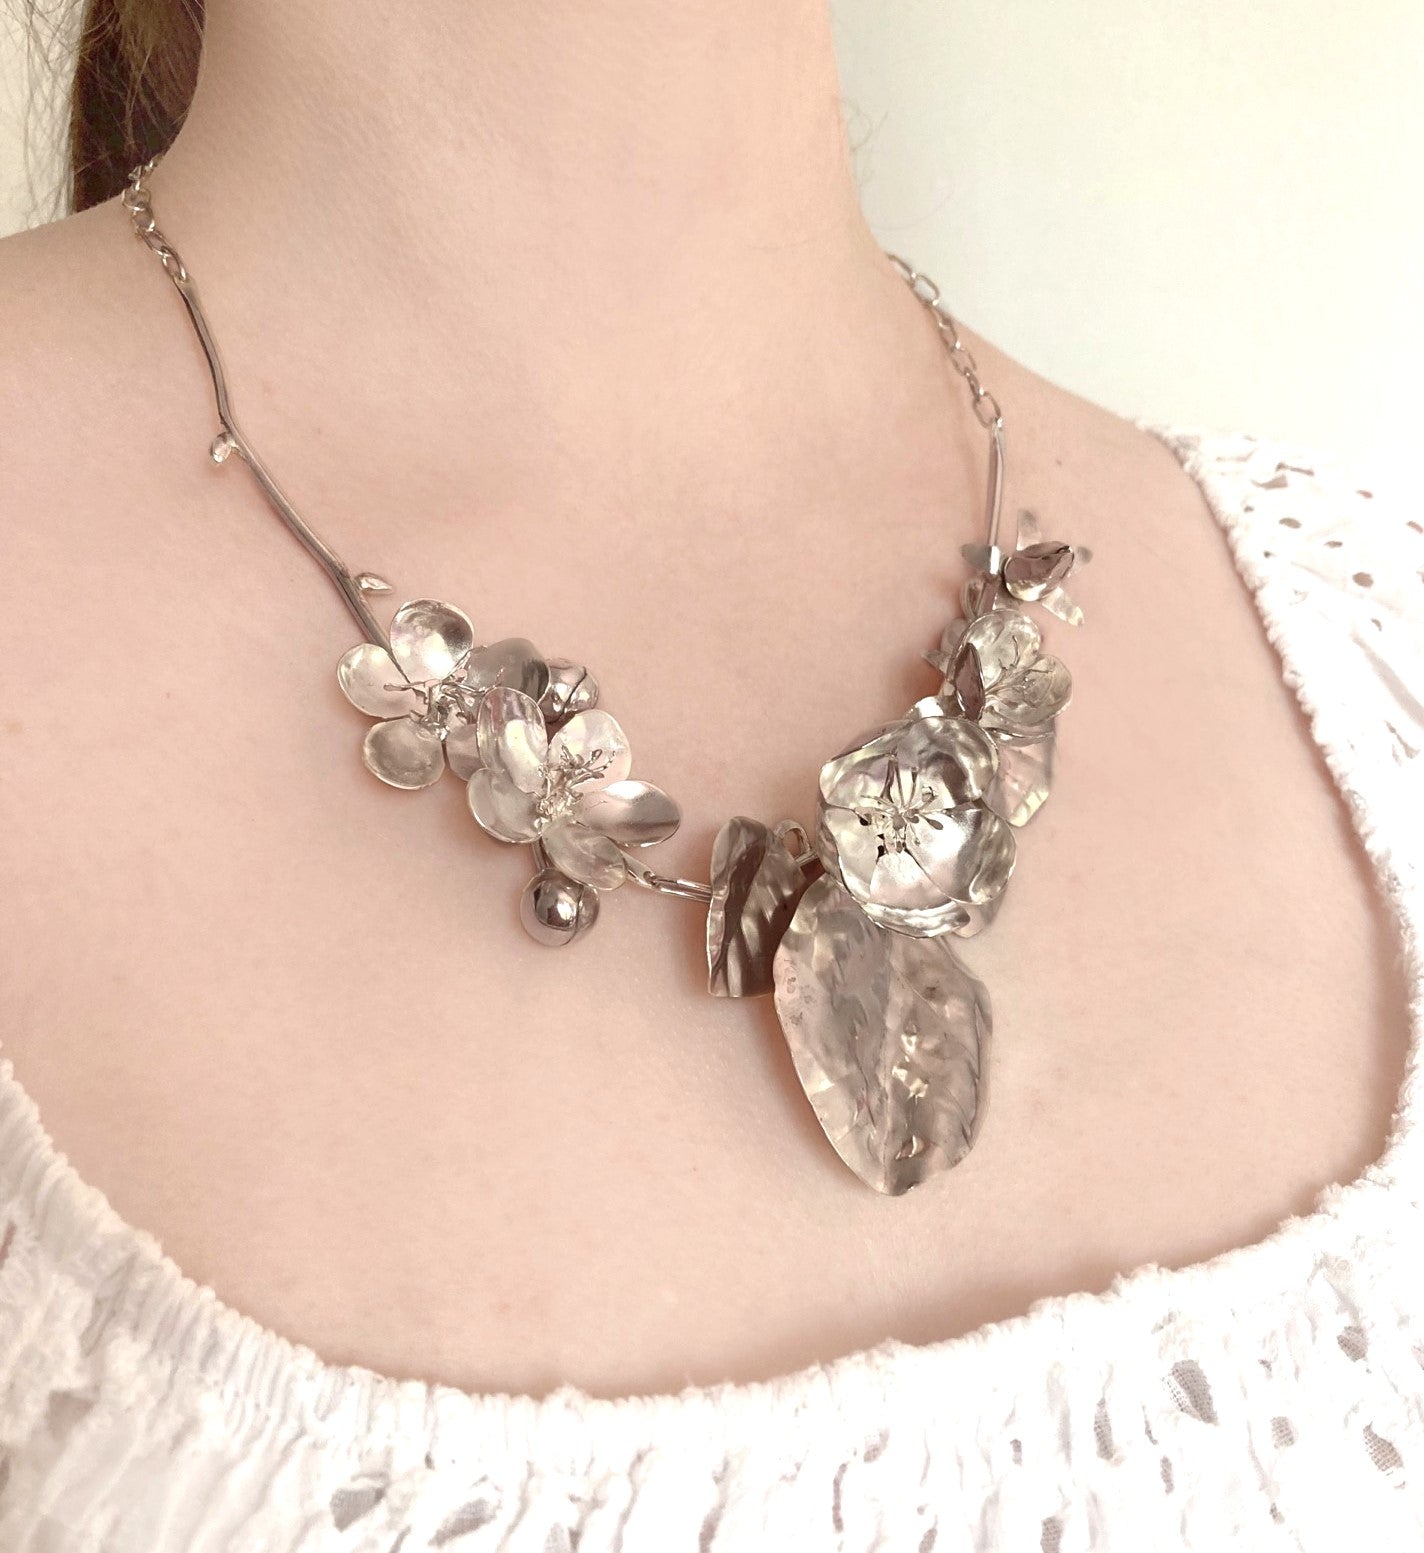 Quince and Apple Blossom statement botanical necklace hand forged in sterling silver